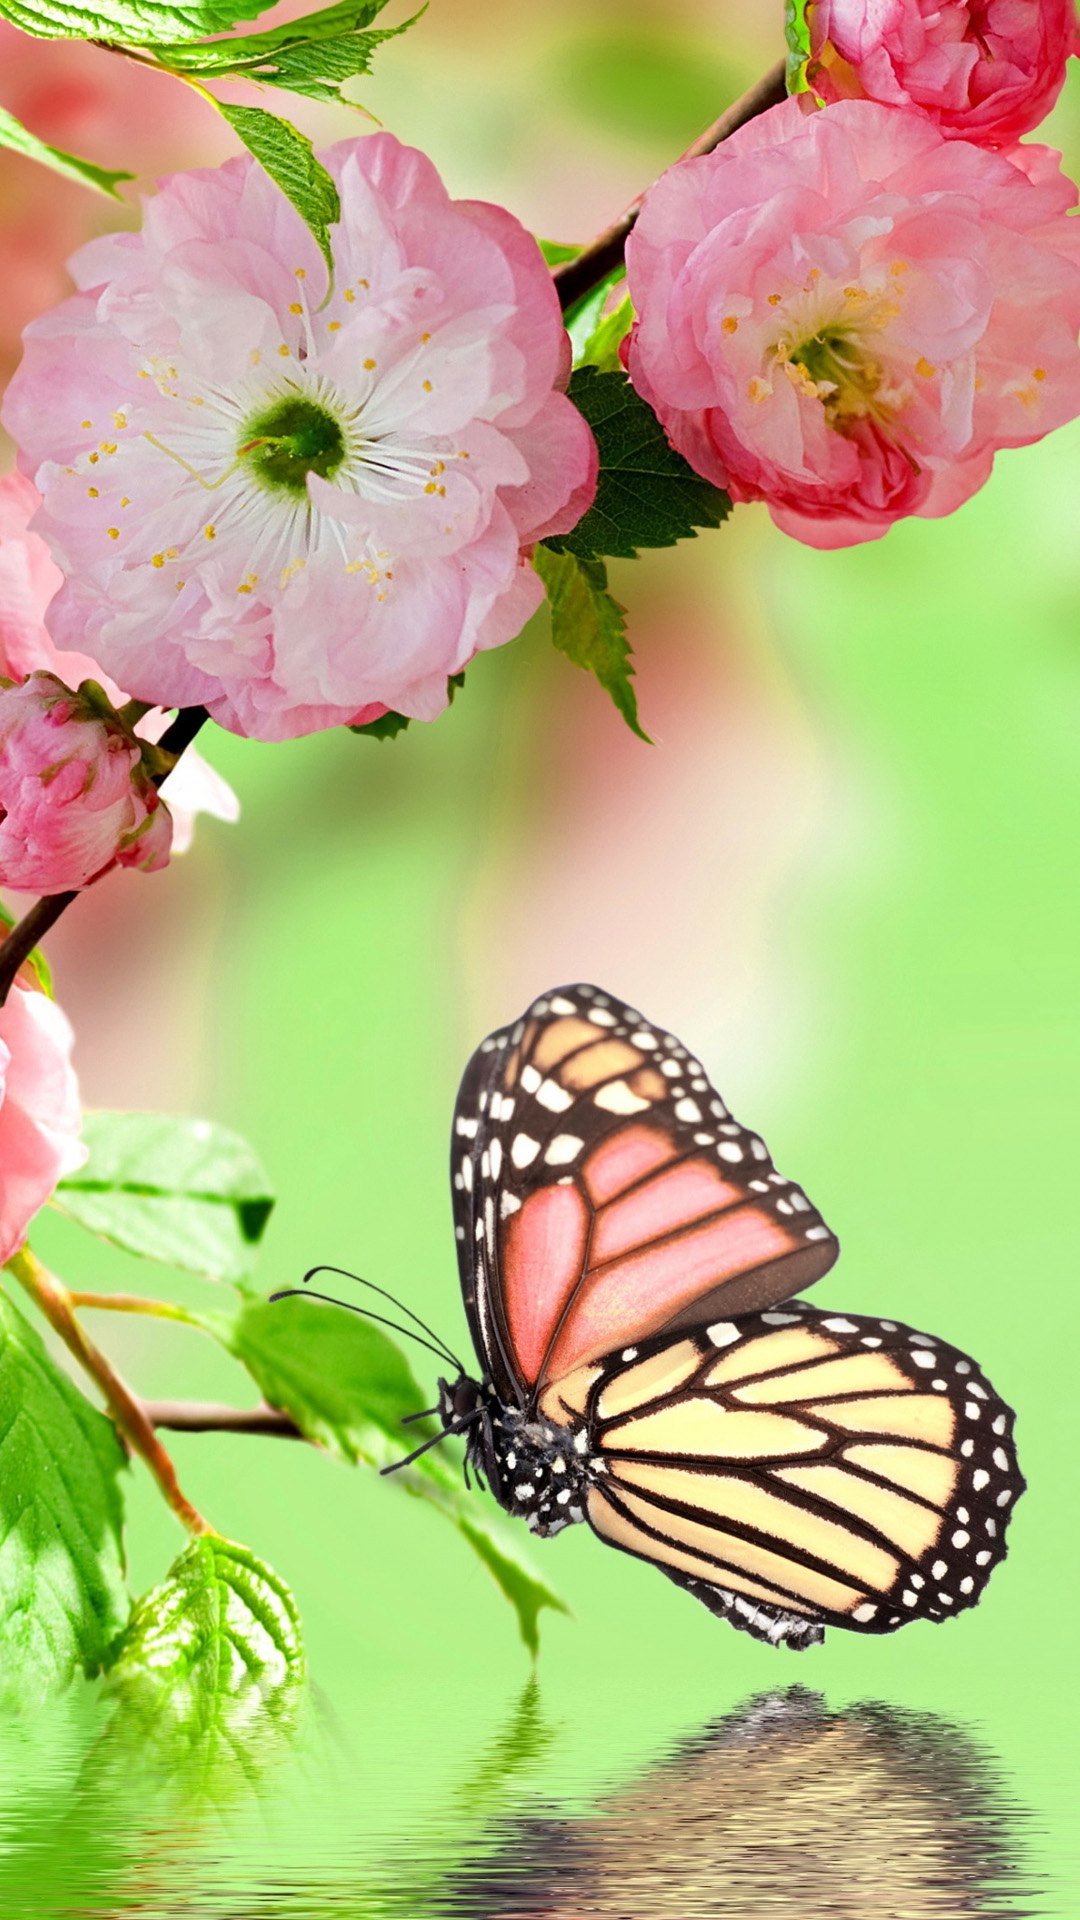 Butterfly Wallpaper For Android - Butterfly Wallpaper Full Screen -  1080x1920 Wallpaper 